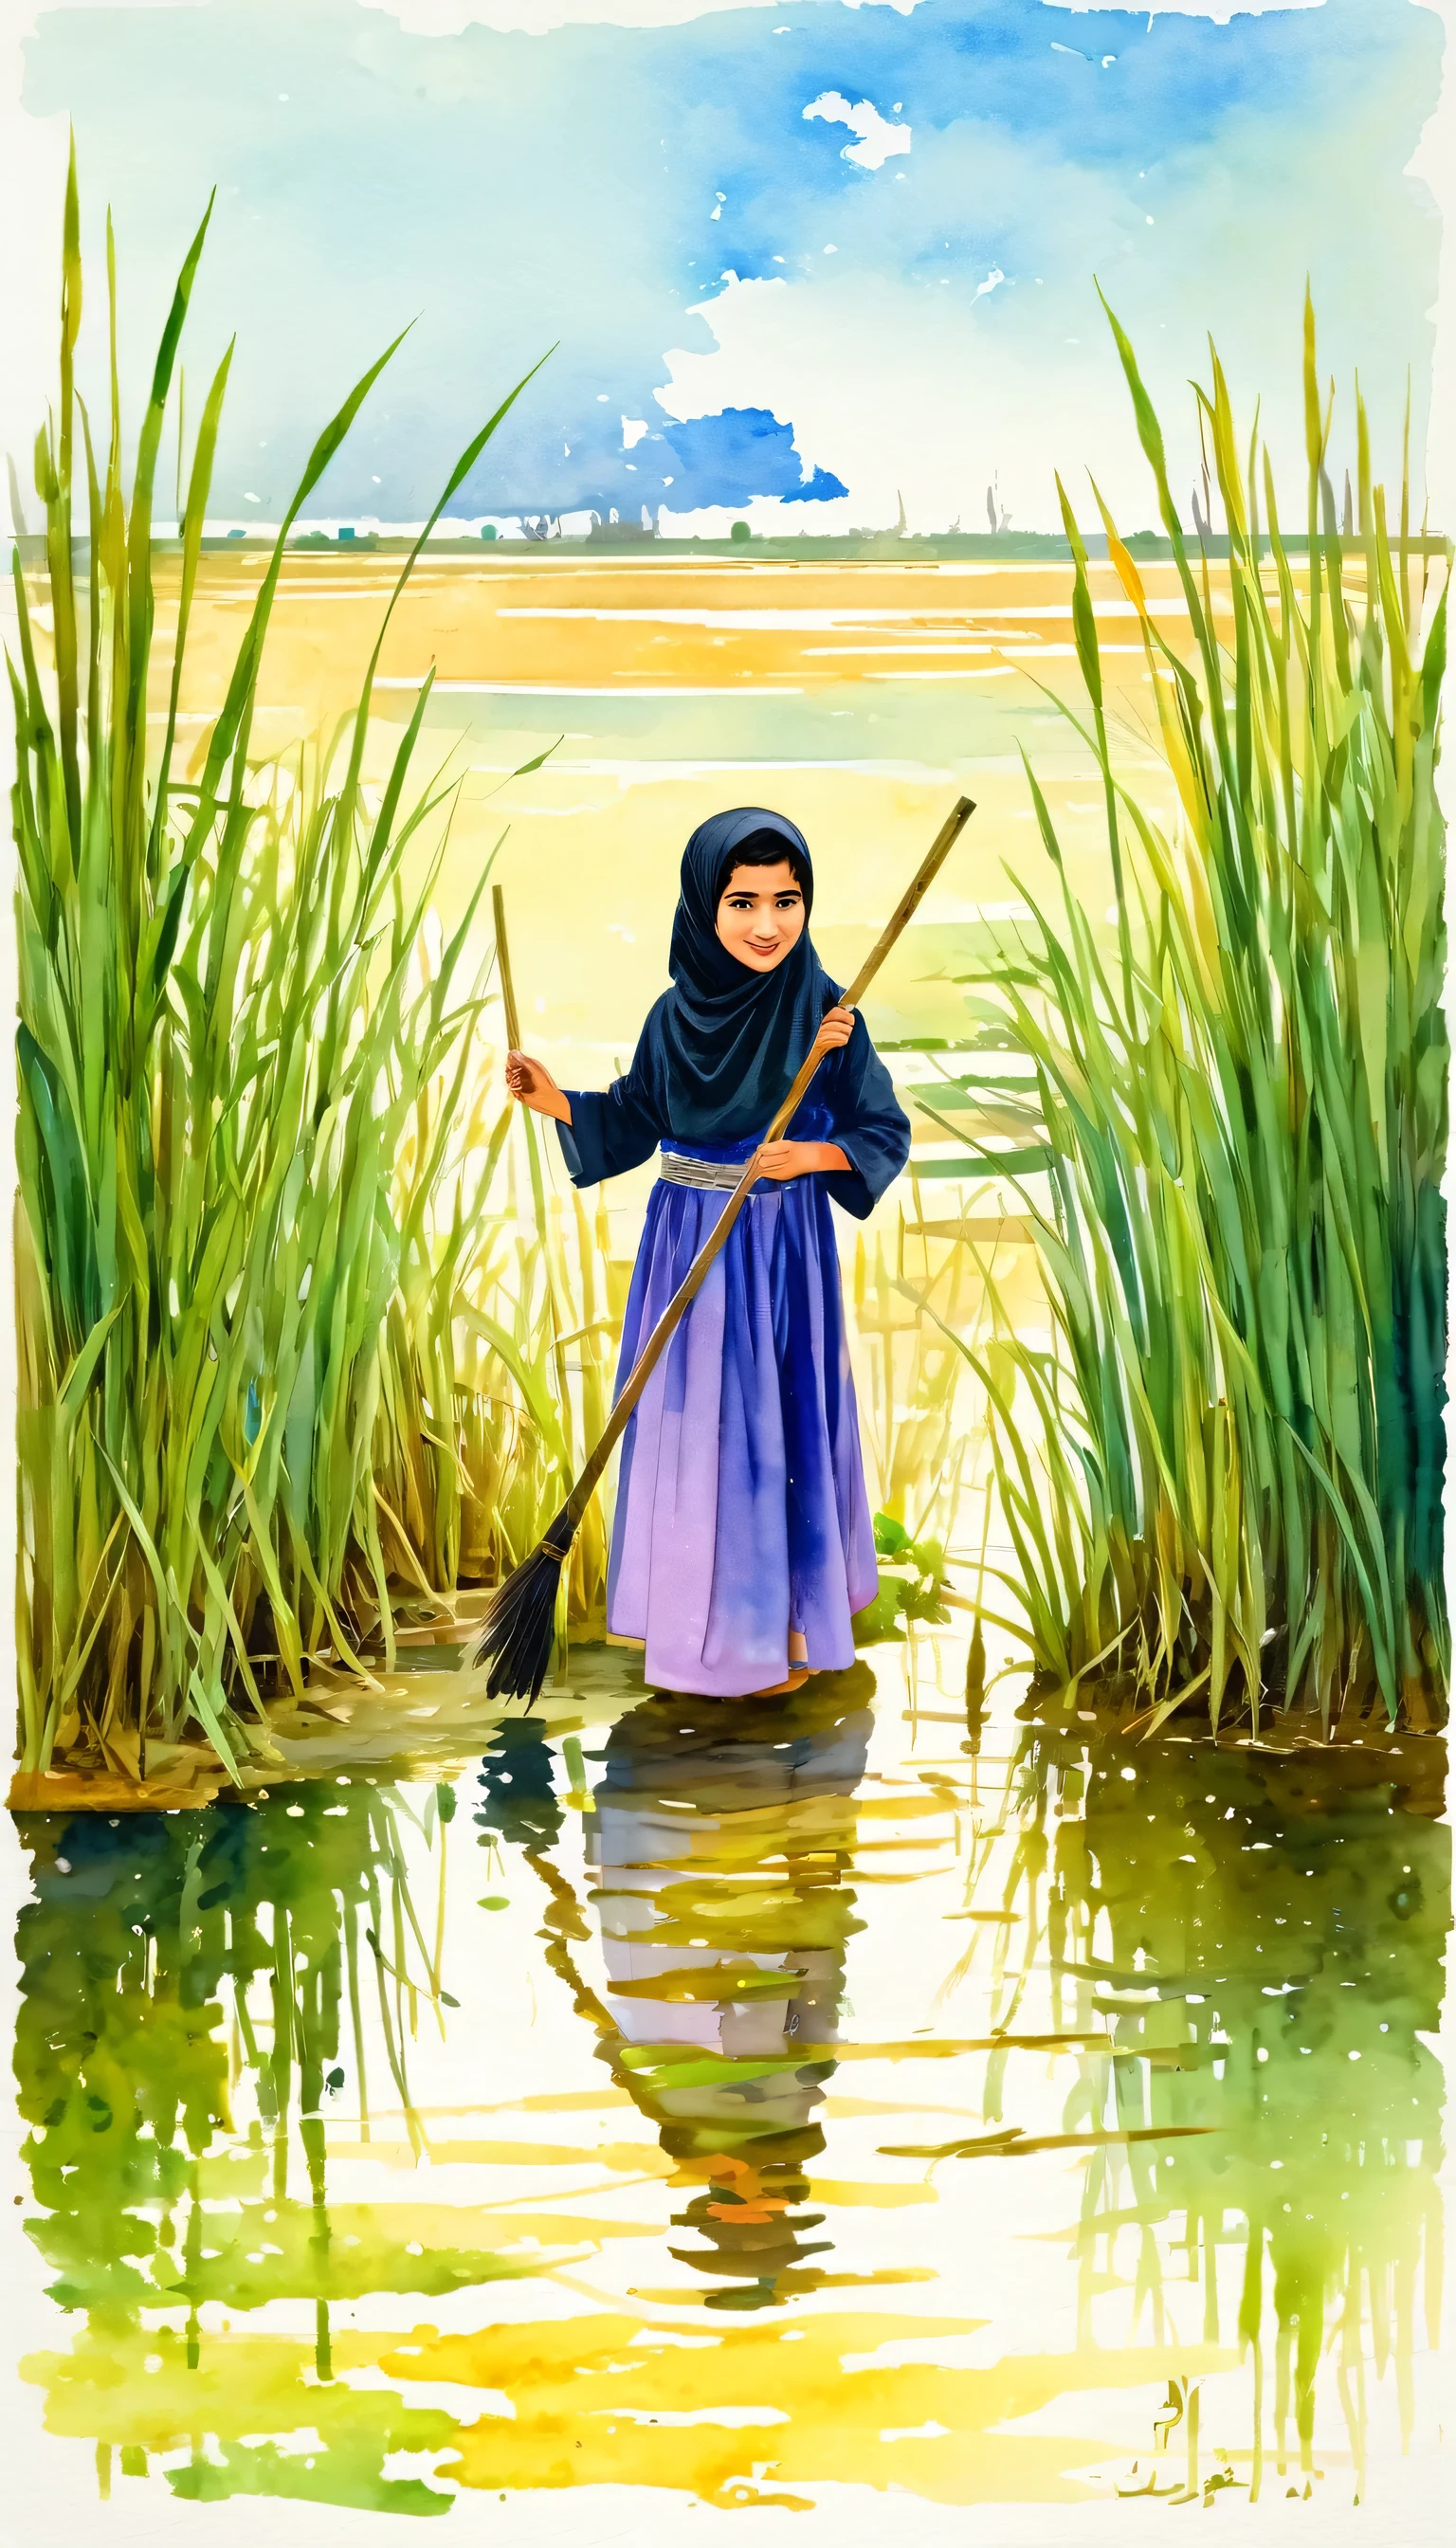 Iraqi 8-years old girl wearing a traditional robe in a boat and holding a stick in a swamp, Southern Iraq, marshes, traditional boat, the surroundings include grass and reeds and plants, solo, black_hair, 1girl, girl_focus, black hijab, grass, realistic, holding, outdoors, standing, modern art, painting, drawing, watercolor, psychedelic colors